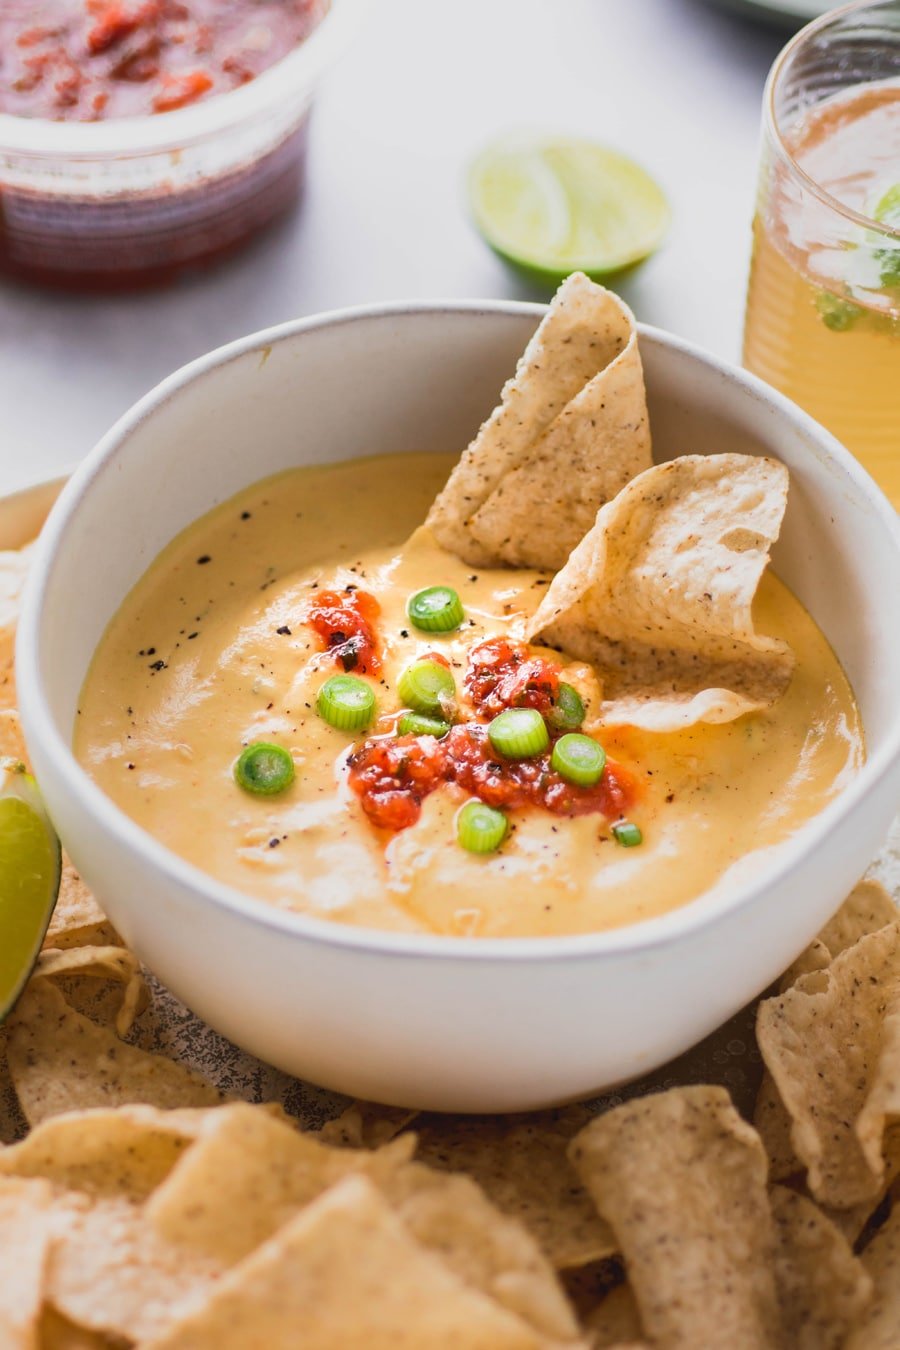 This creamy cashew queso dip is made with ZERO processed ingredients, for an authentic tasting, full flavored, dairy free alternative to this well loved dip. SO crave worthy and made with anti-inflammatory, good-for-you ingredients! Vegan + whole30 compliant.